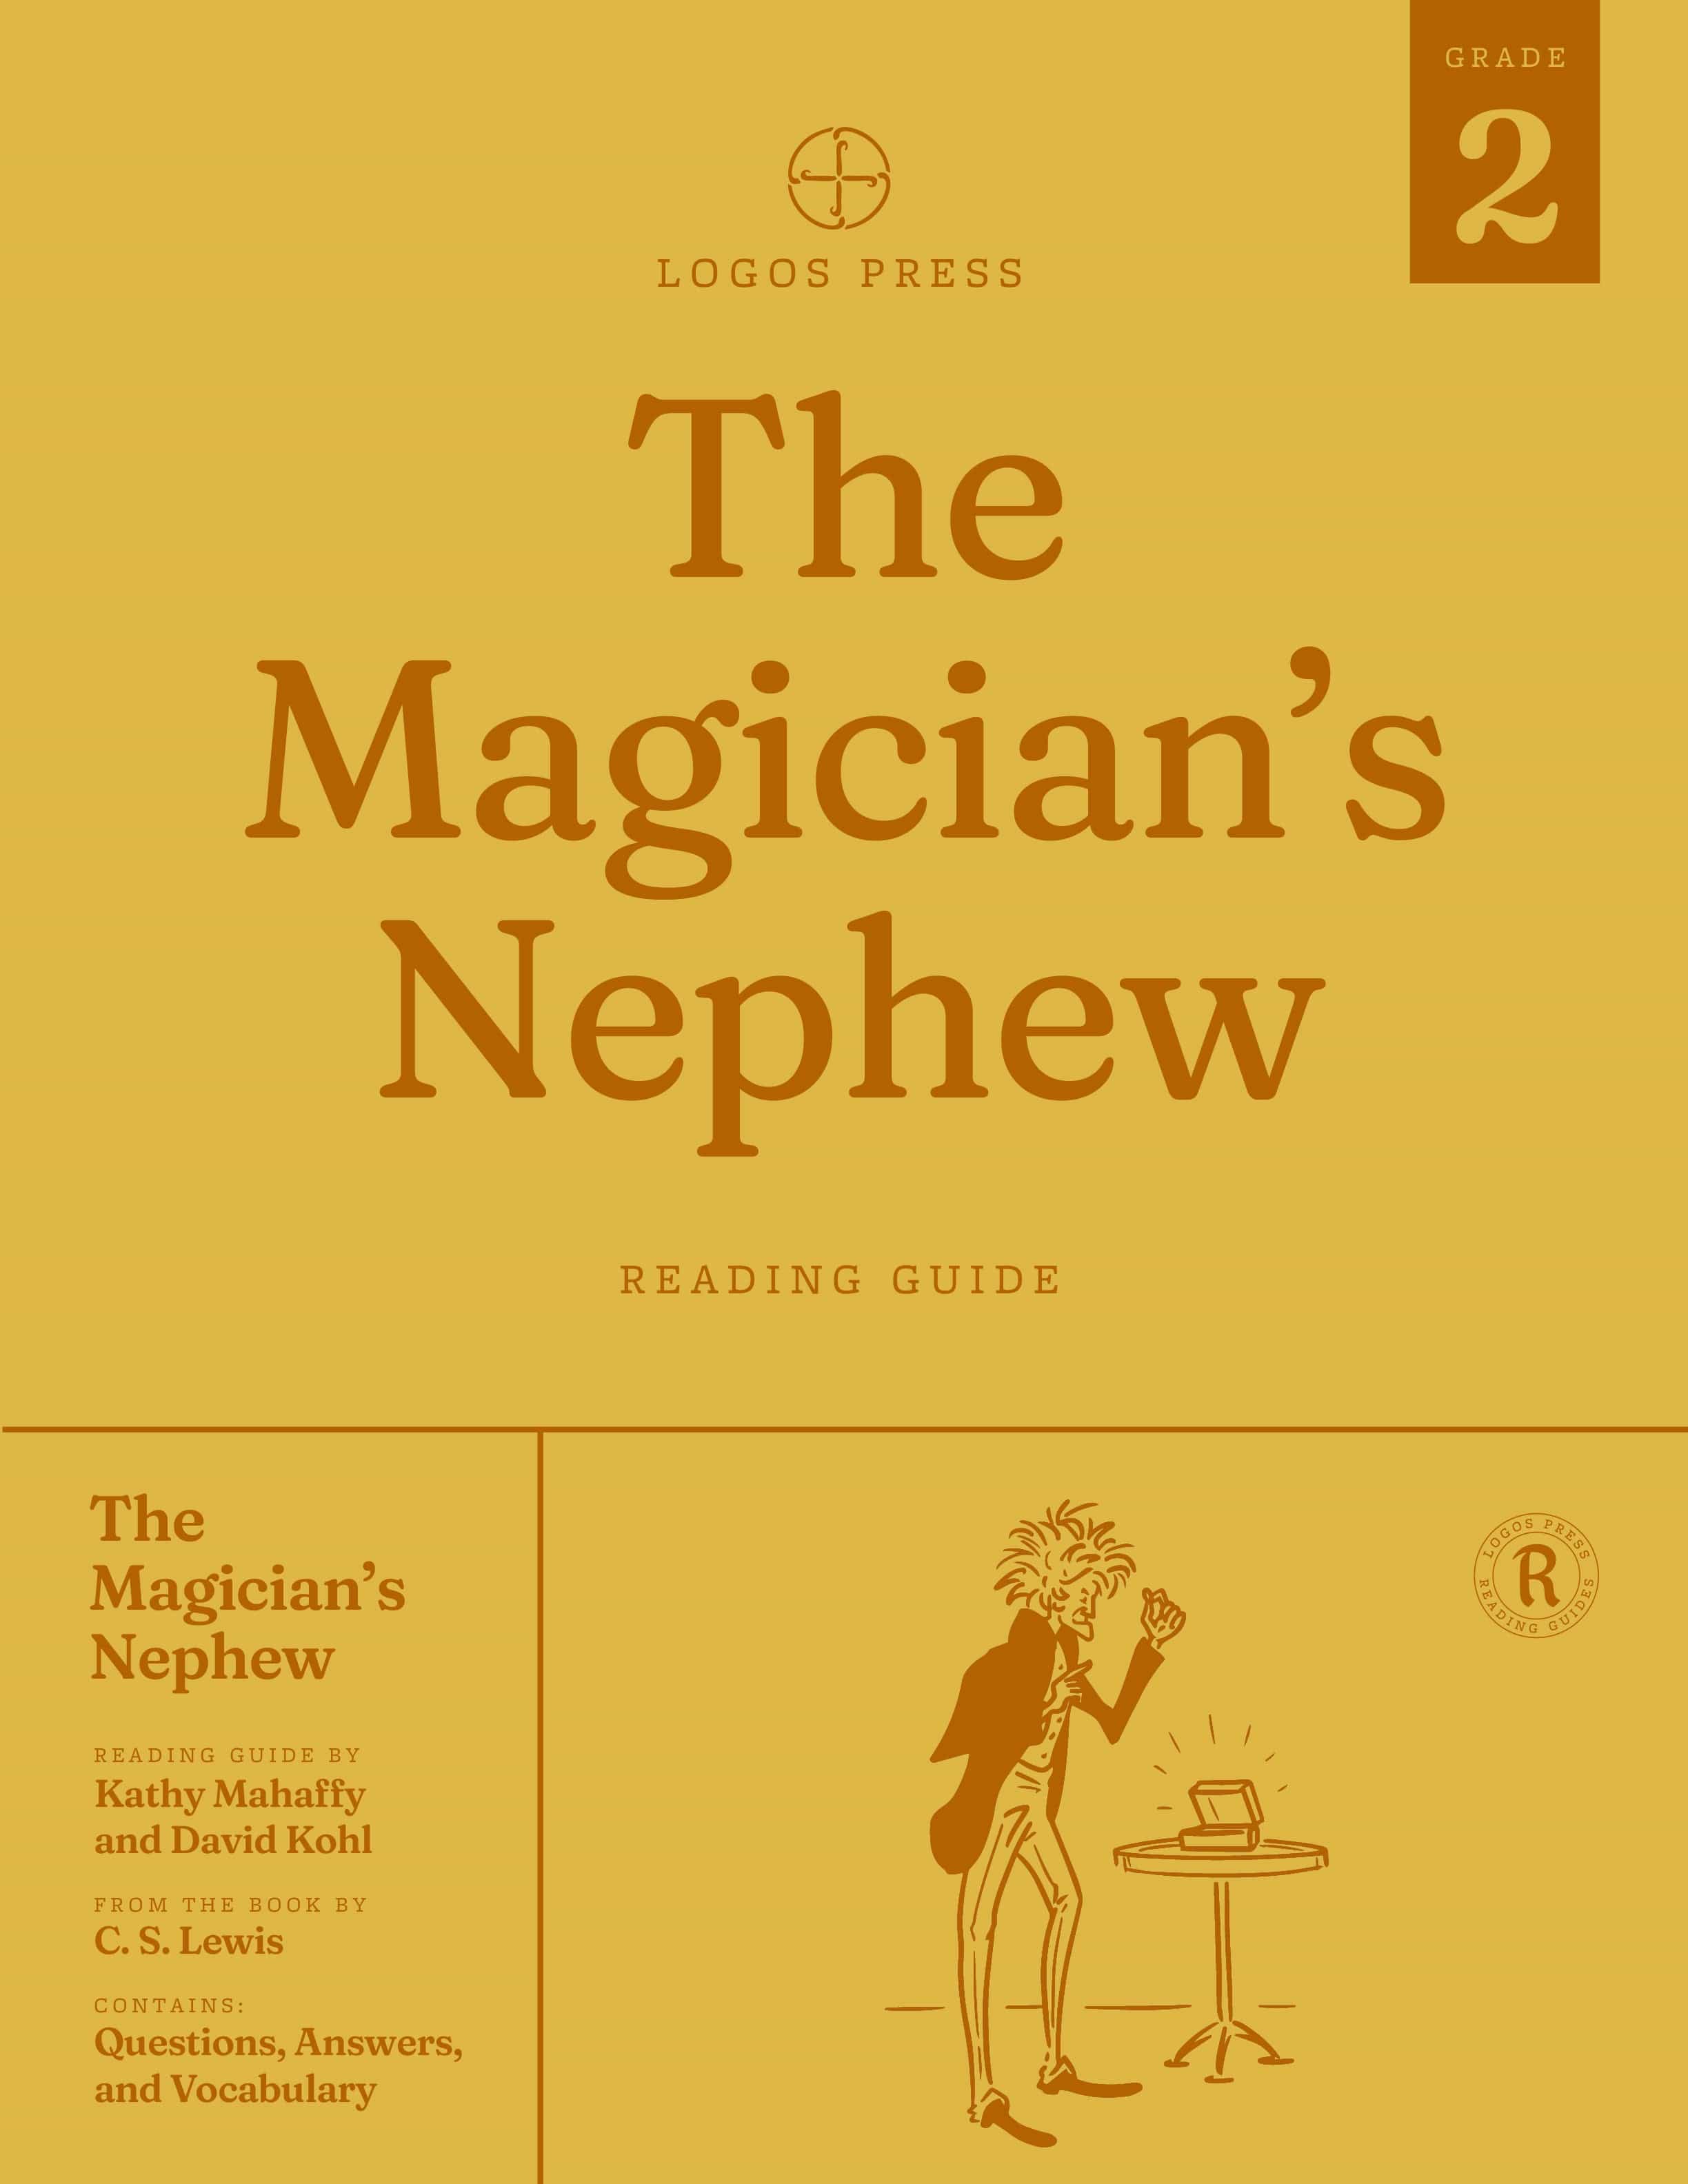 The Magician's Nephew - Reading Guide (Download)